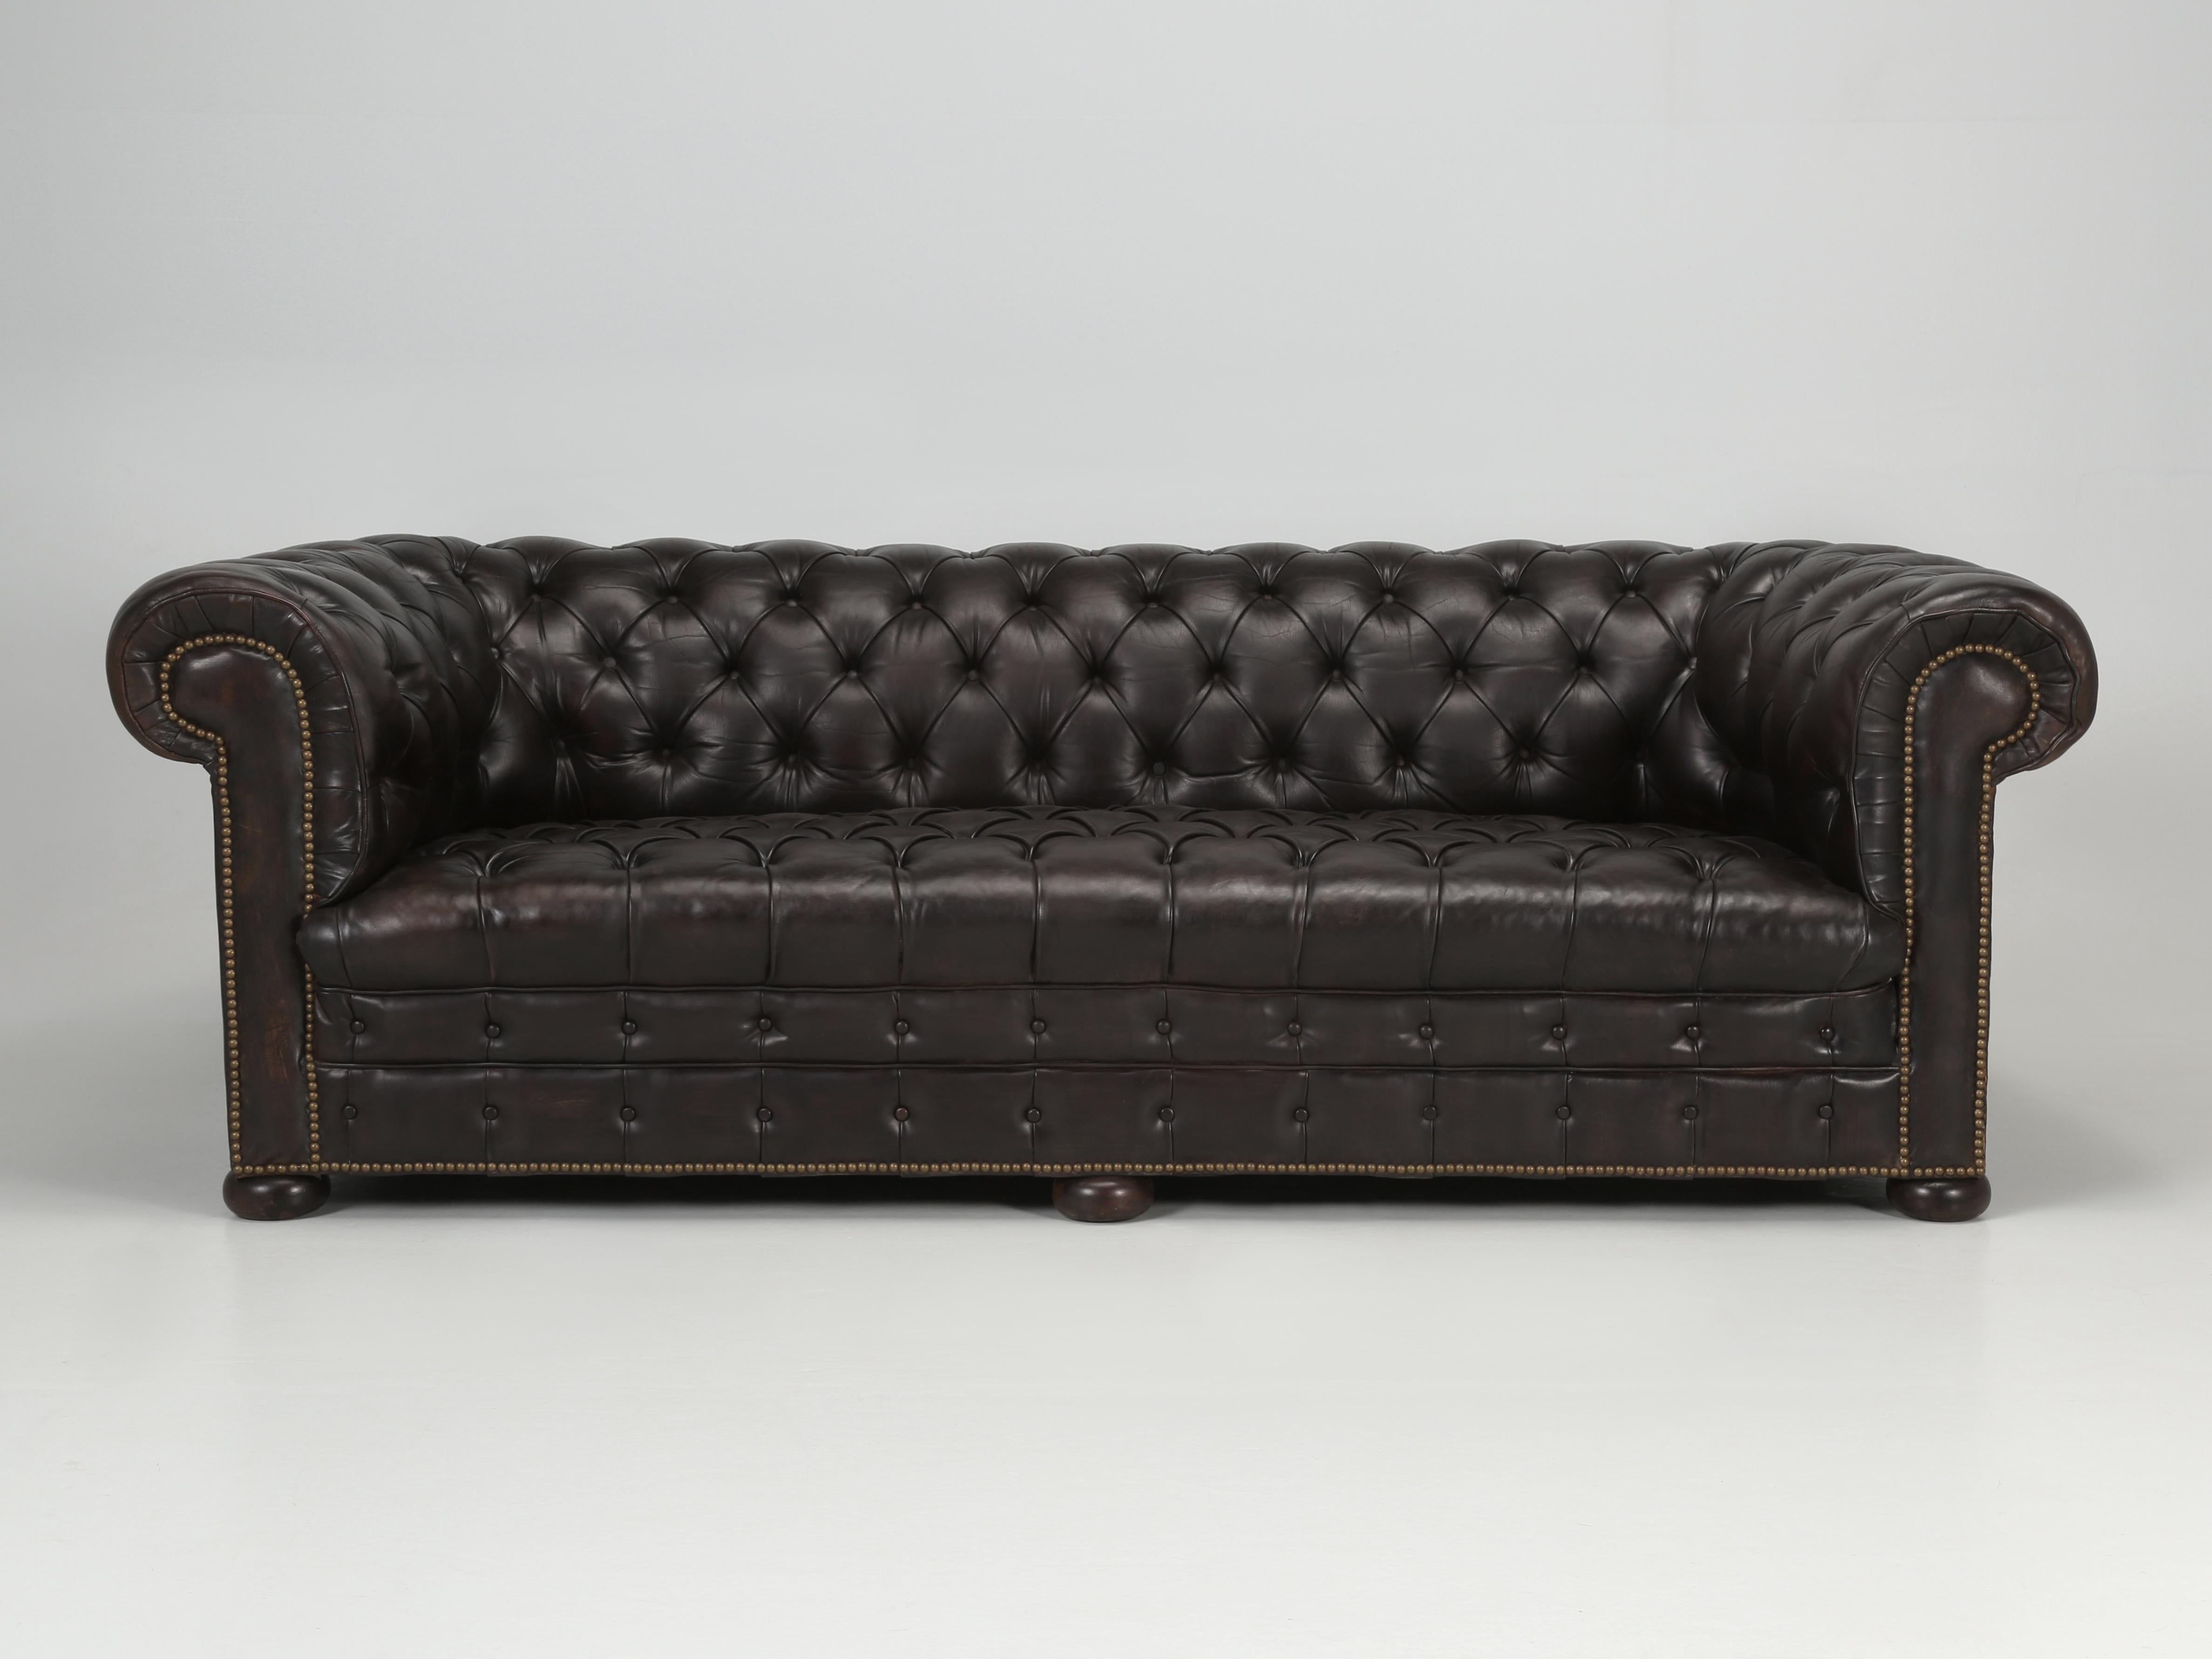 Antique English Leather Chesterfield Sofa that just emerged out of our inhouse Old Plank Upholstery Department, after a very long and exhausted stay. Restoring or conserving an old leather is truly a dying Art and very few shops today have the